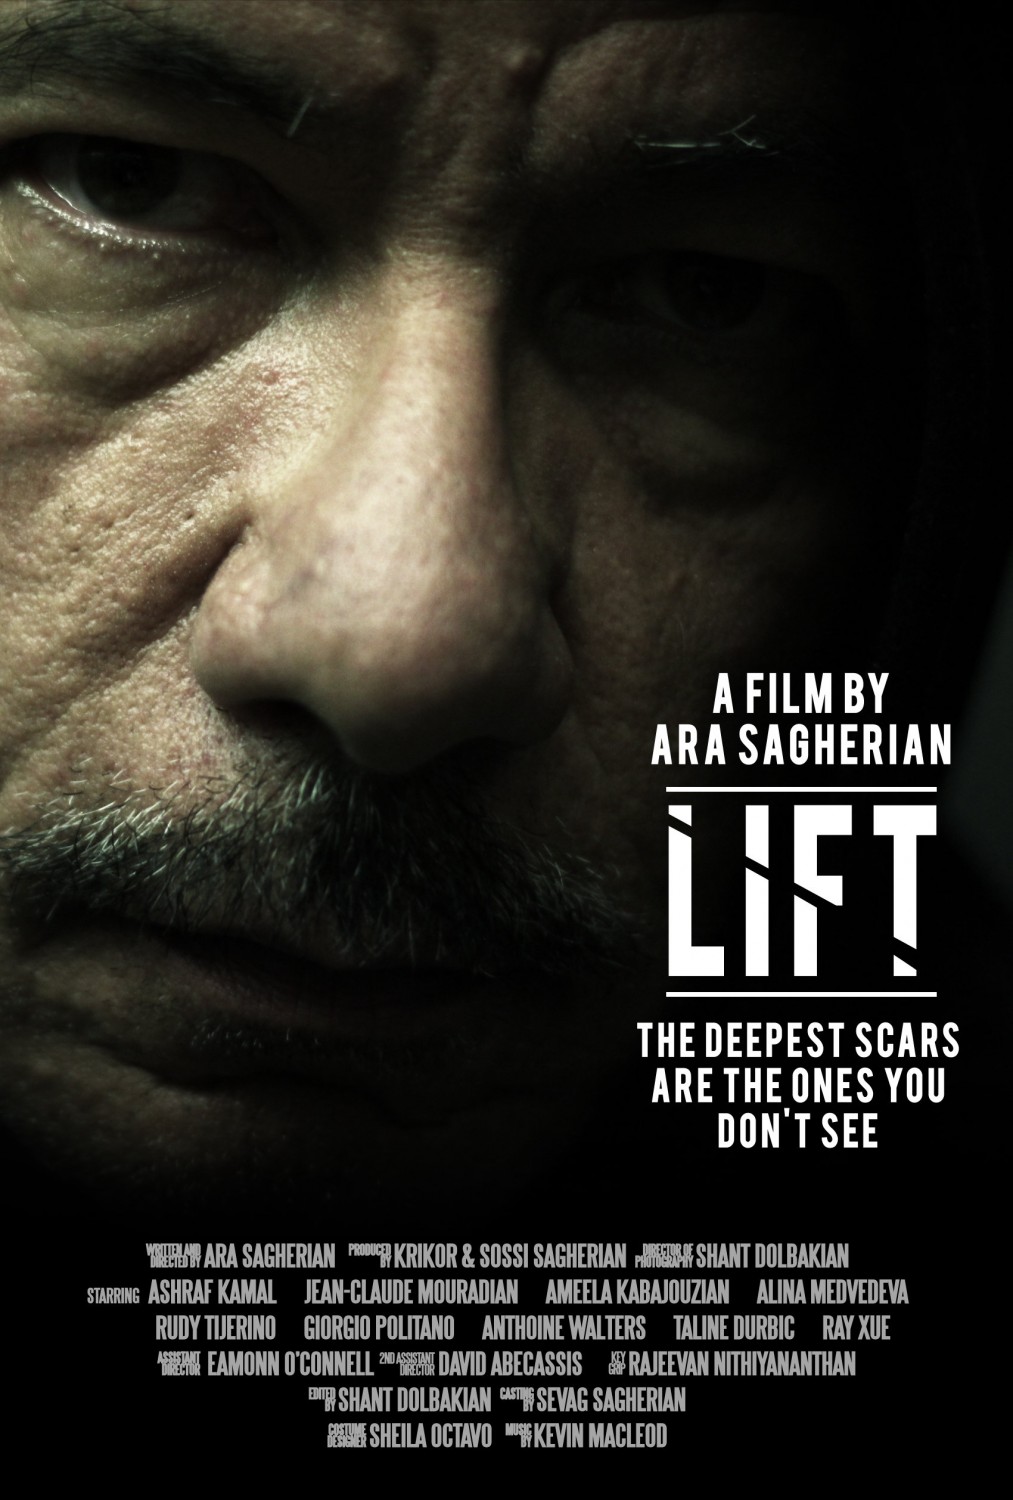 Extra Large Movie Poster Image for Lift